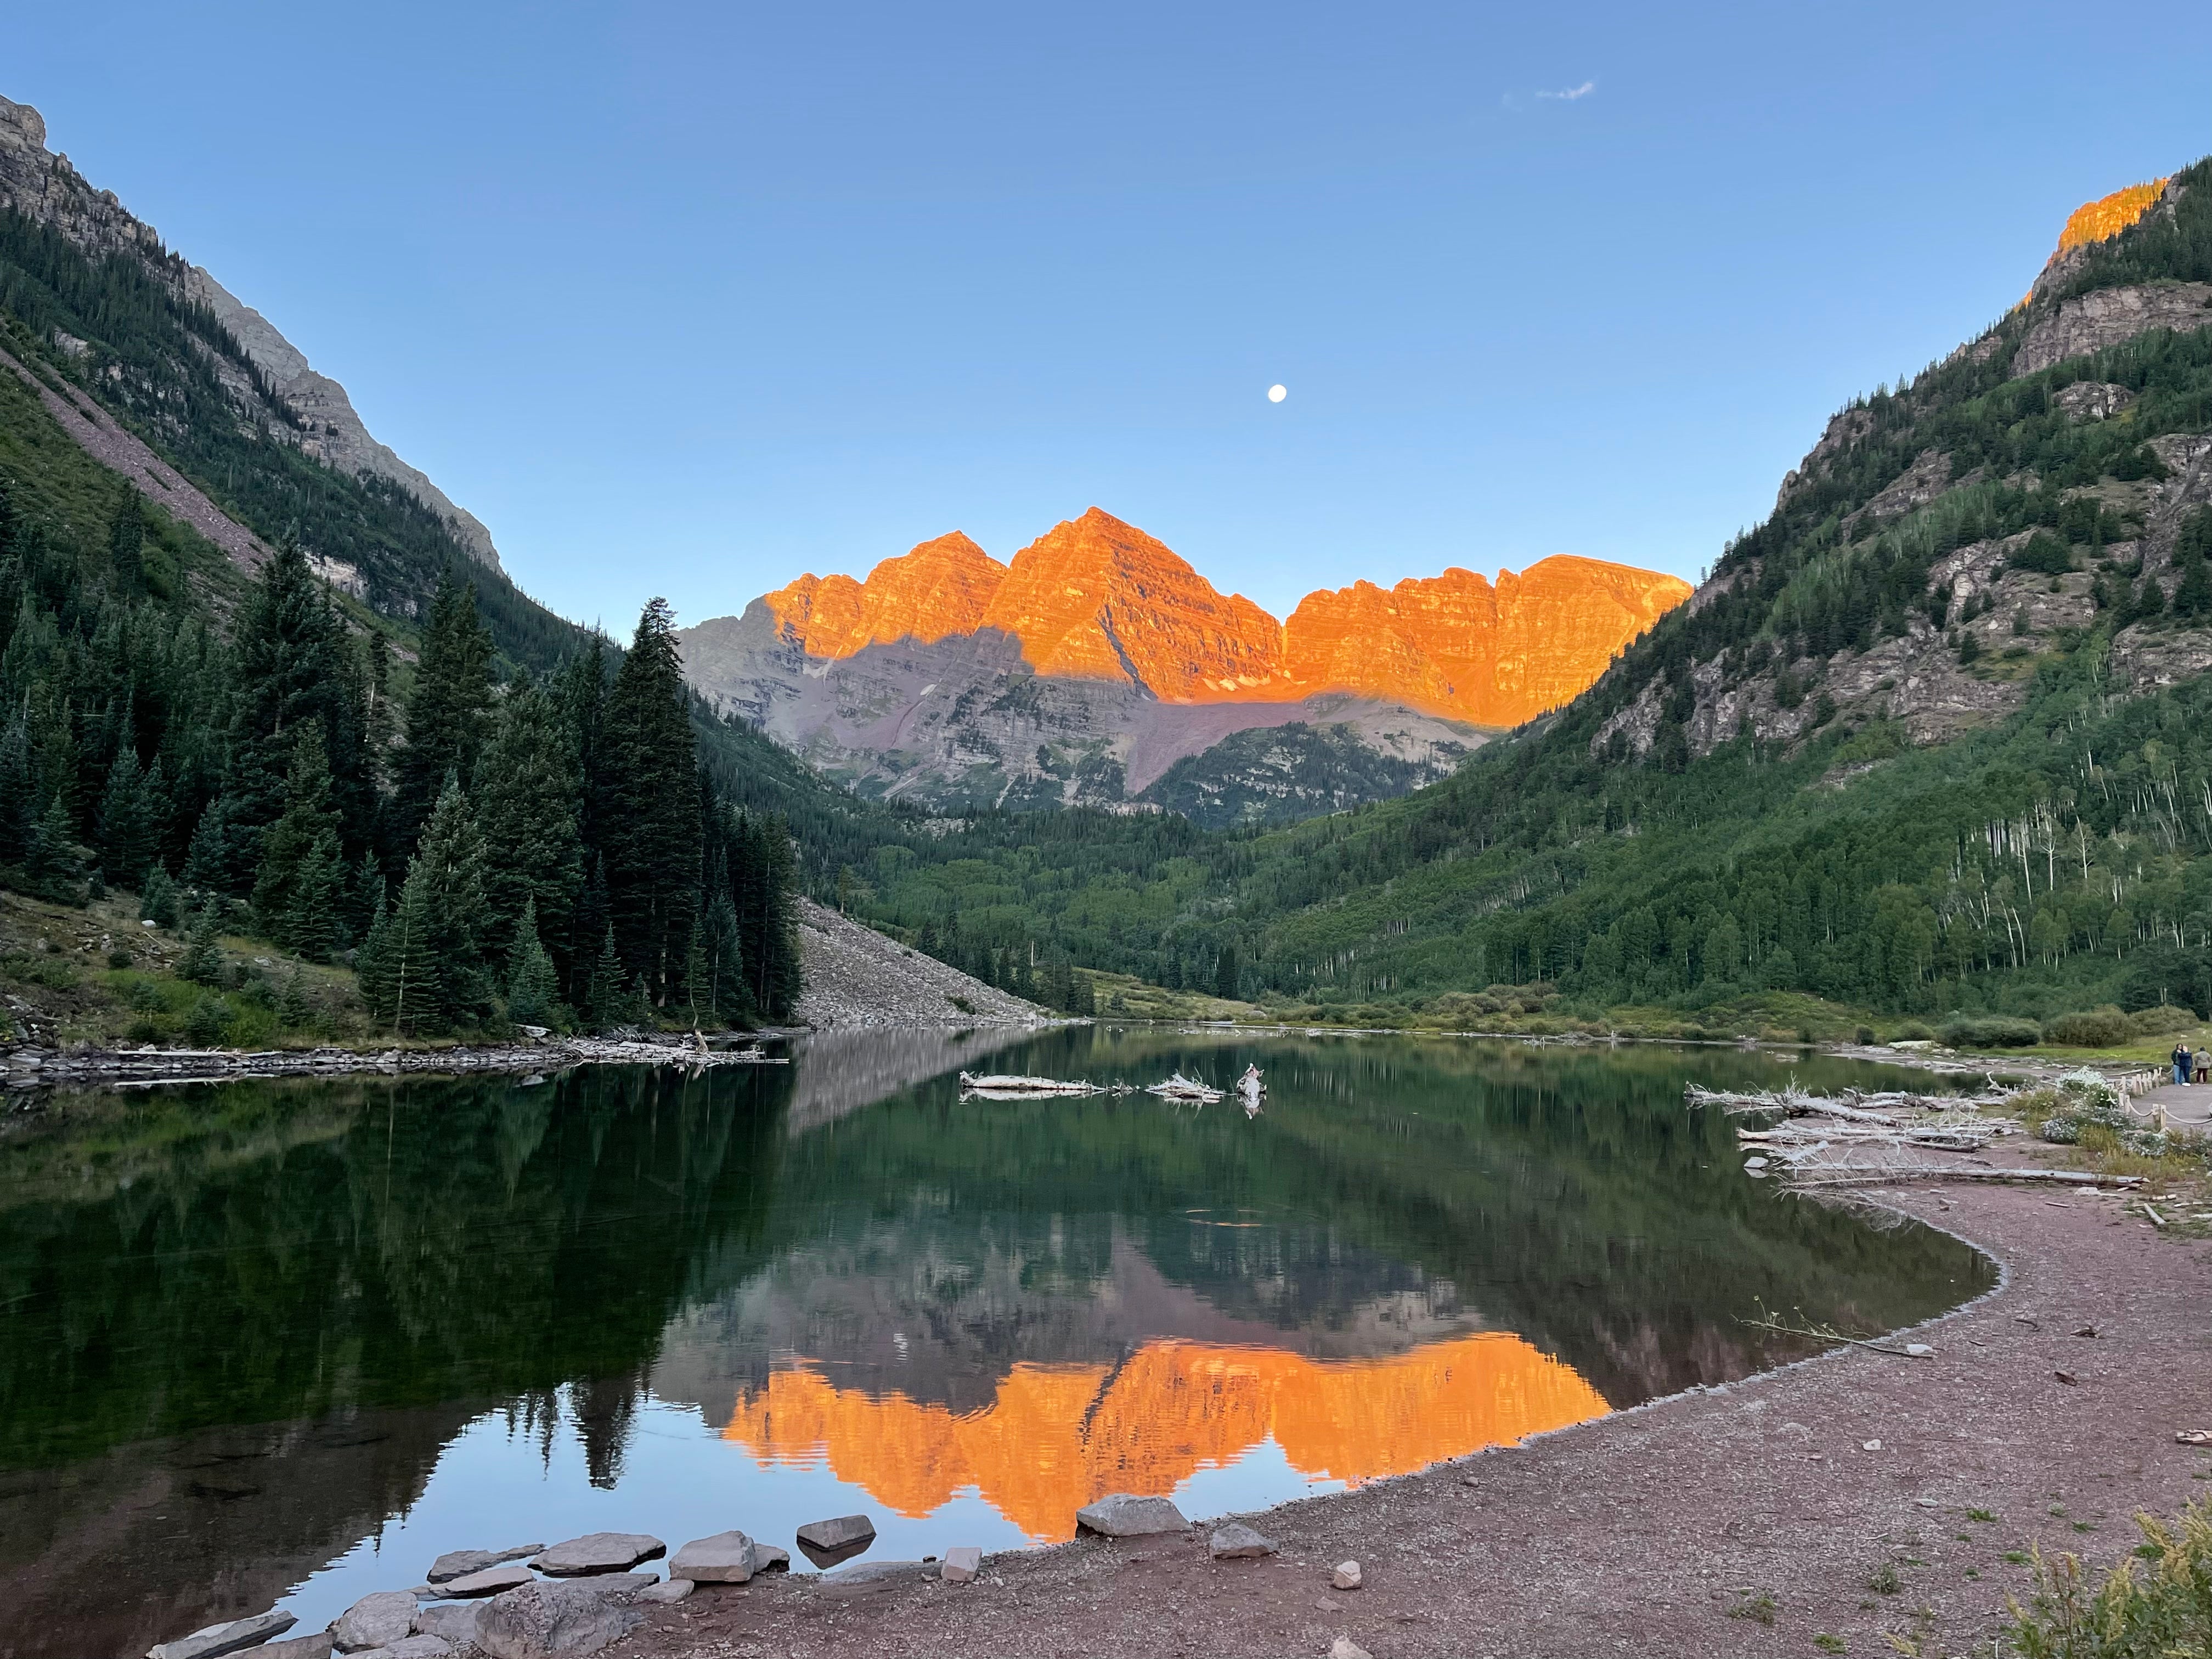 Camper submitted image from Maroon Bells Amphitheatre - 4